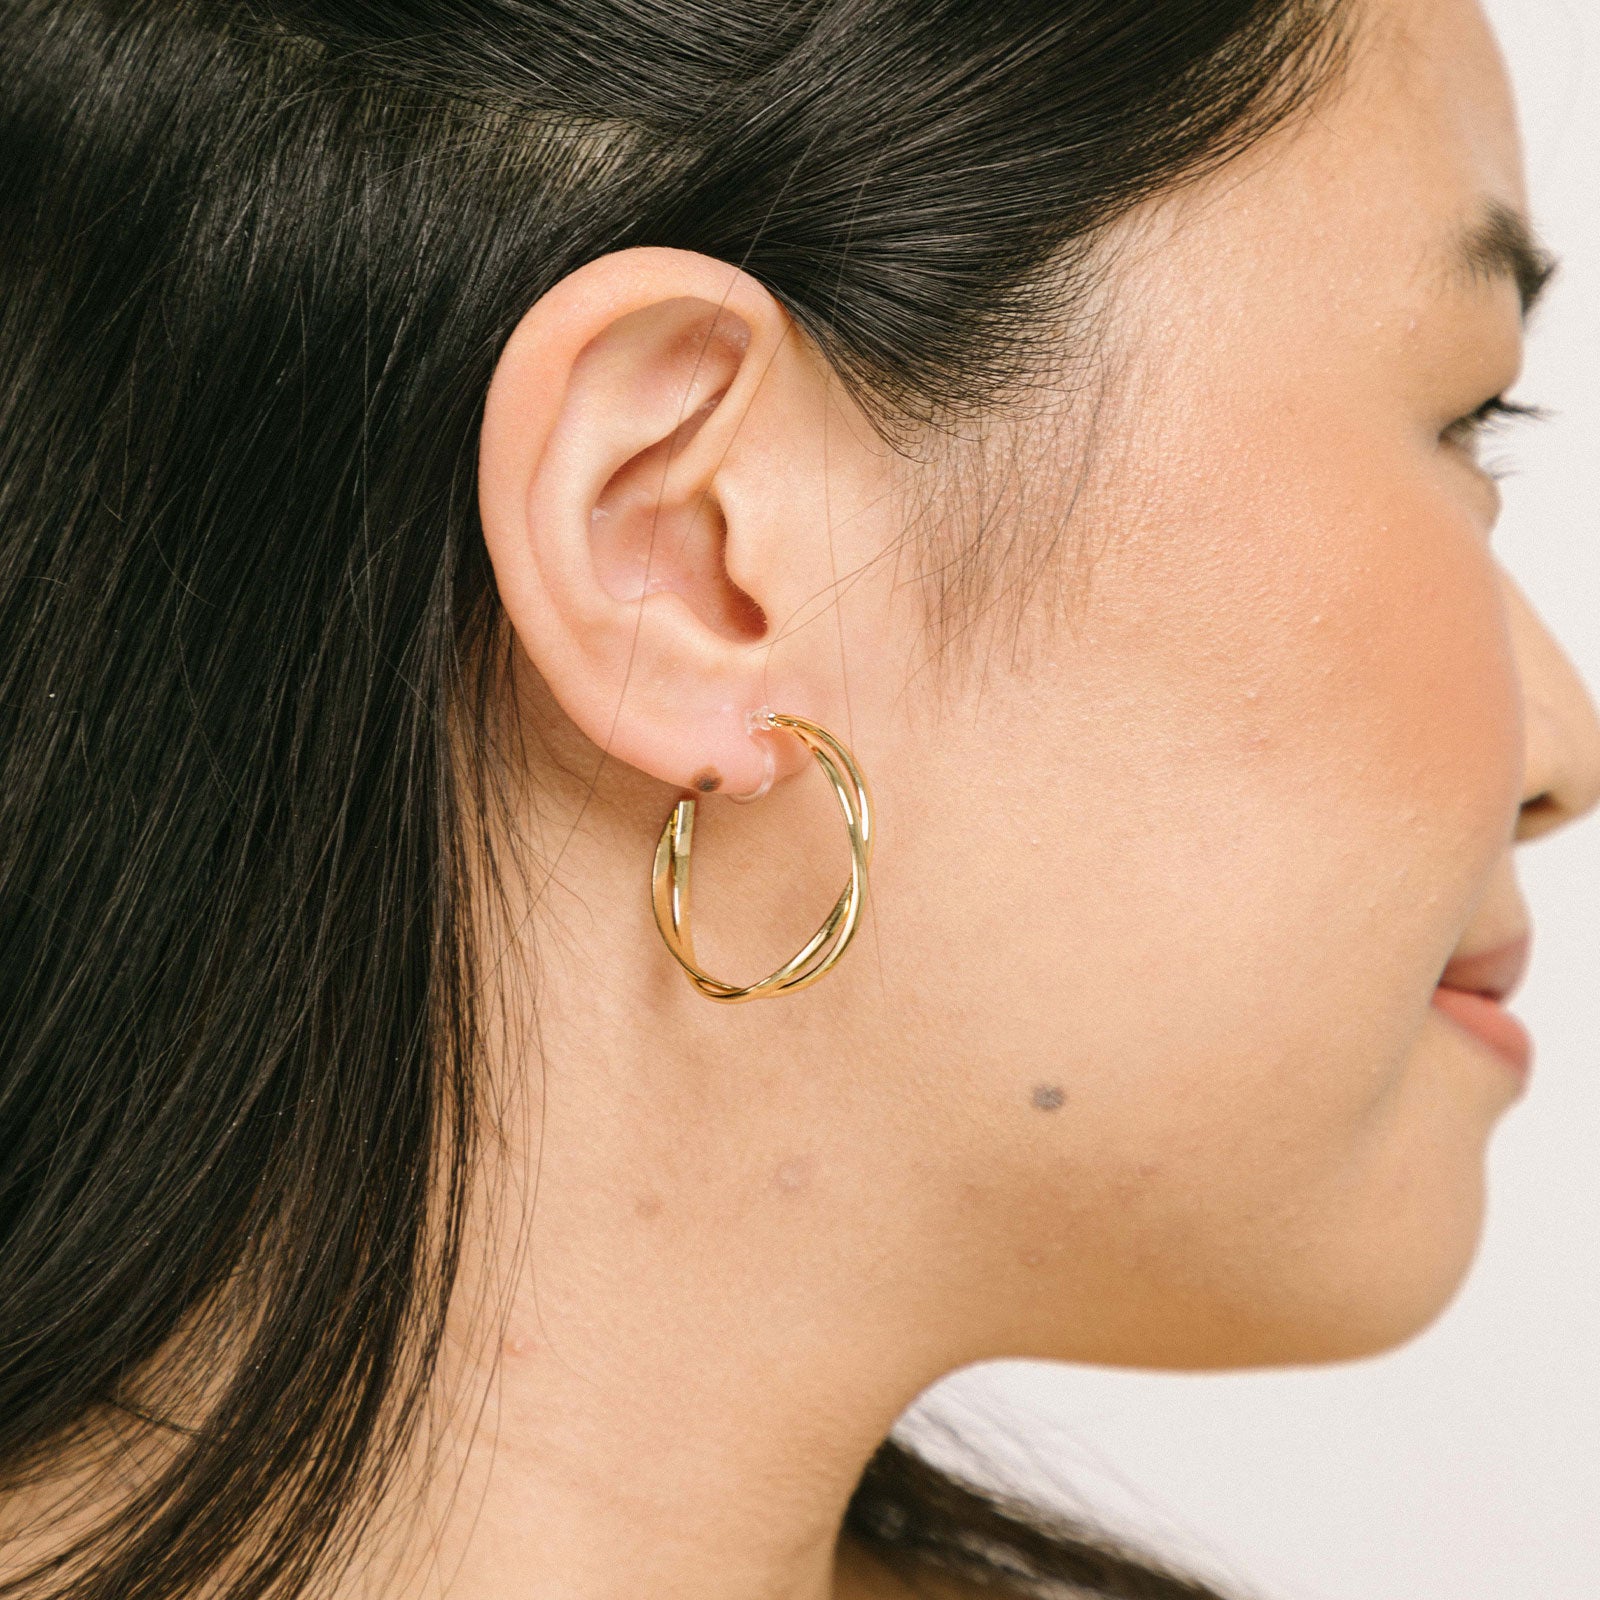 A model wearing the Gold Vienna Hoop Clip-On Earrings feature a resin clip-on closure with medium secure hold. The earrings are suitable for all types of ears, with an average comfortable wear time of 8-12 hours. No adjustments can be made. Constructed with gold tone metal alloy, these earrings are also available in silver.